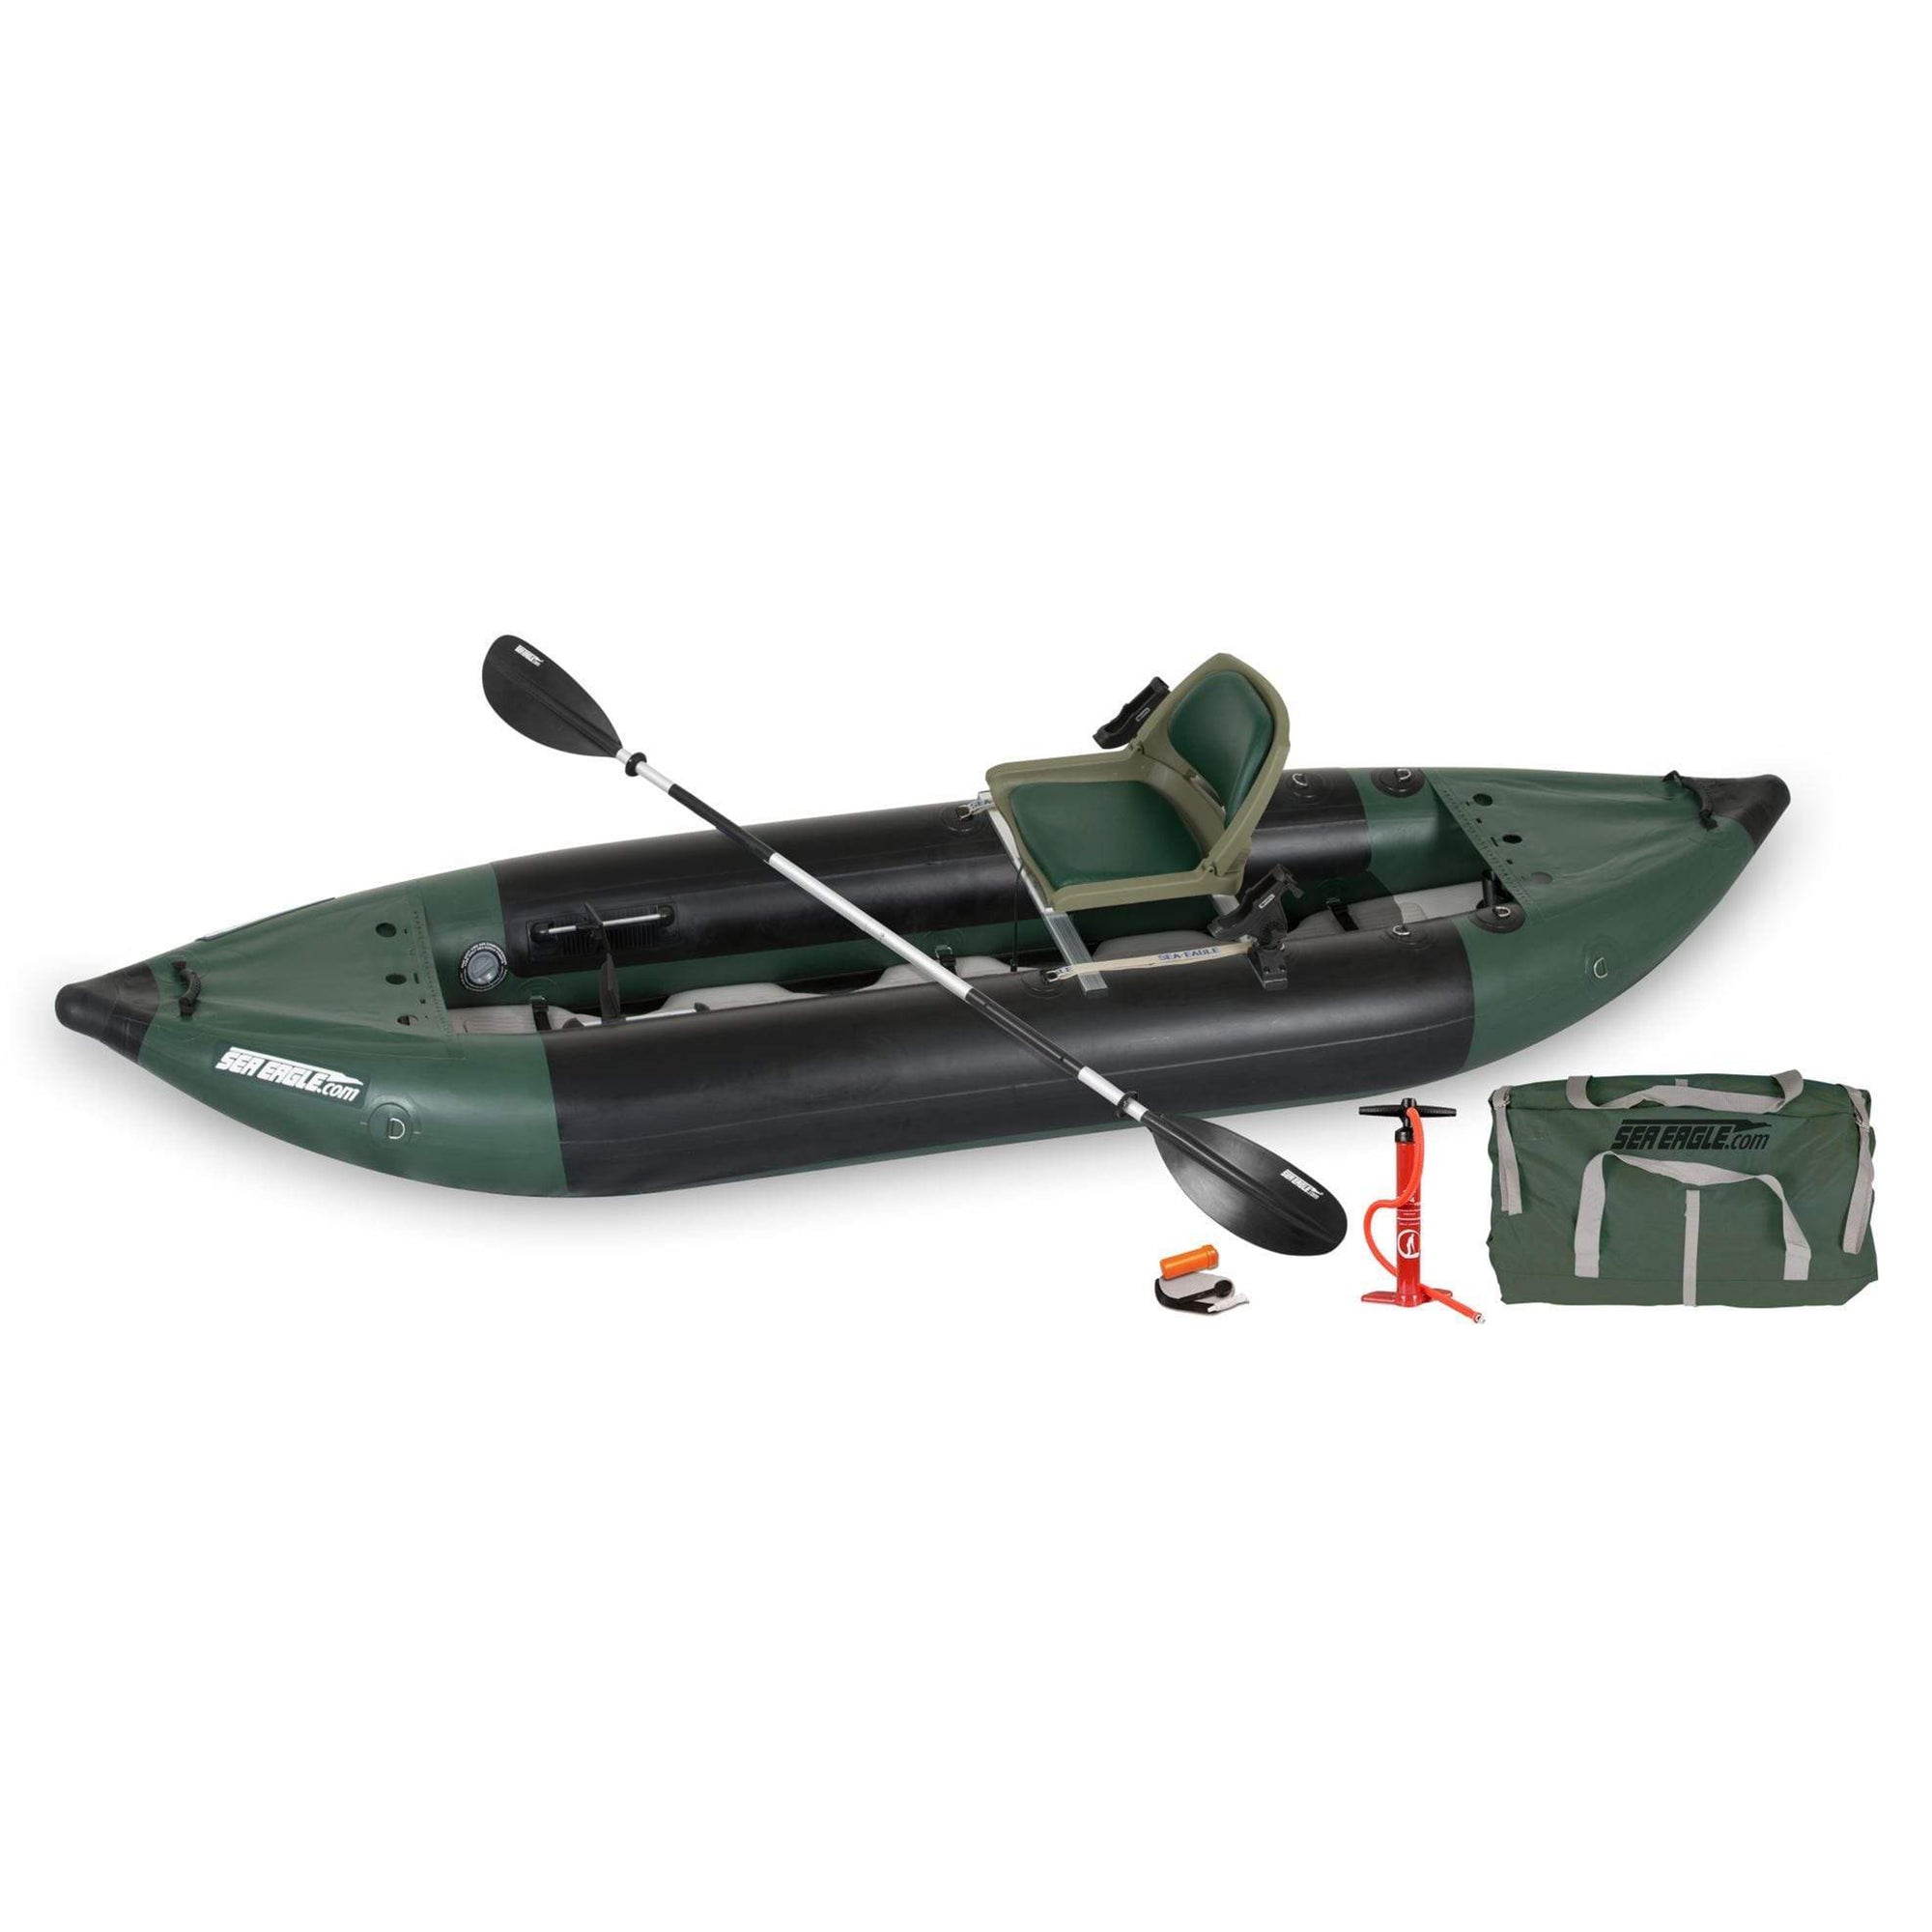 https://cdn.shopify.com/s/files/1/0683/3091/4071/products/seaeagle-inflatable-kayak-sea-eagle-350fx-one-person-11-6-green-fishing-explorer-inflatable-fishing-boat-swivel-seat-fishing-rig-package-350fxk-fr-28620422873225_07227d4d-11_2000x.jpg?v=1682317738